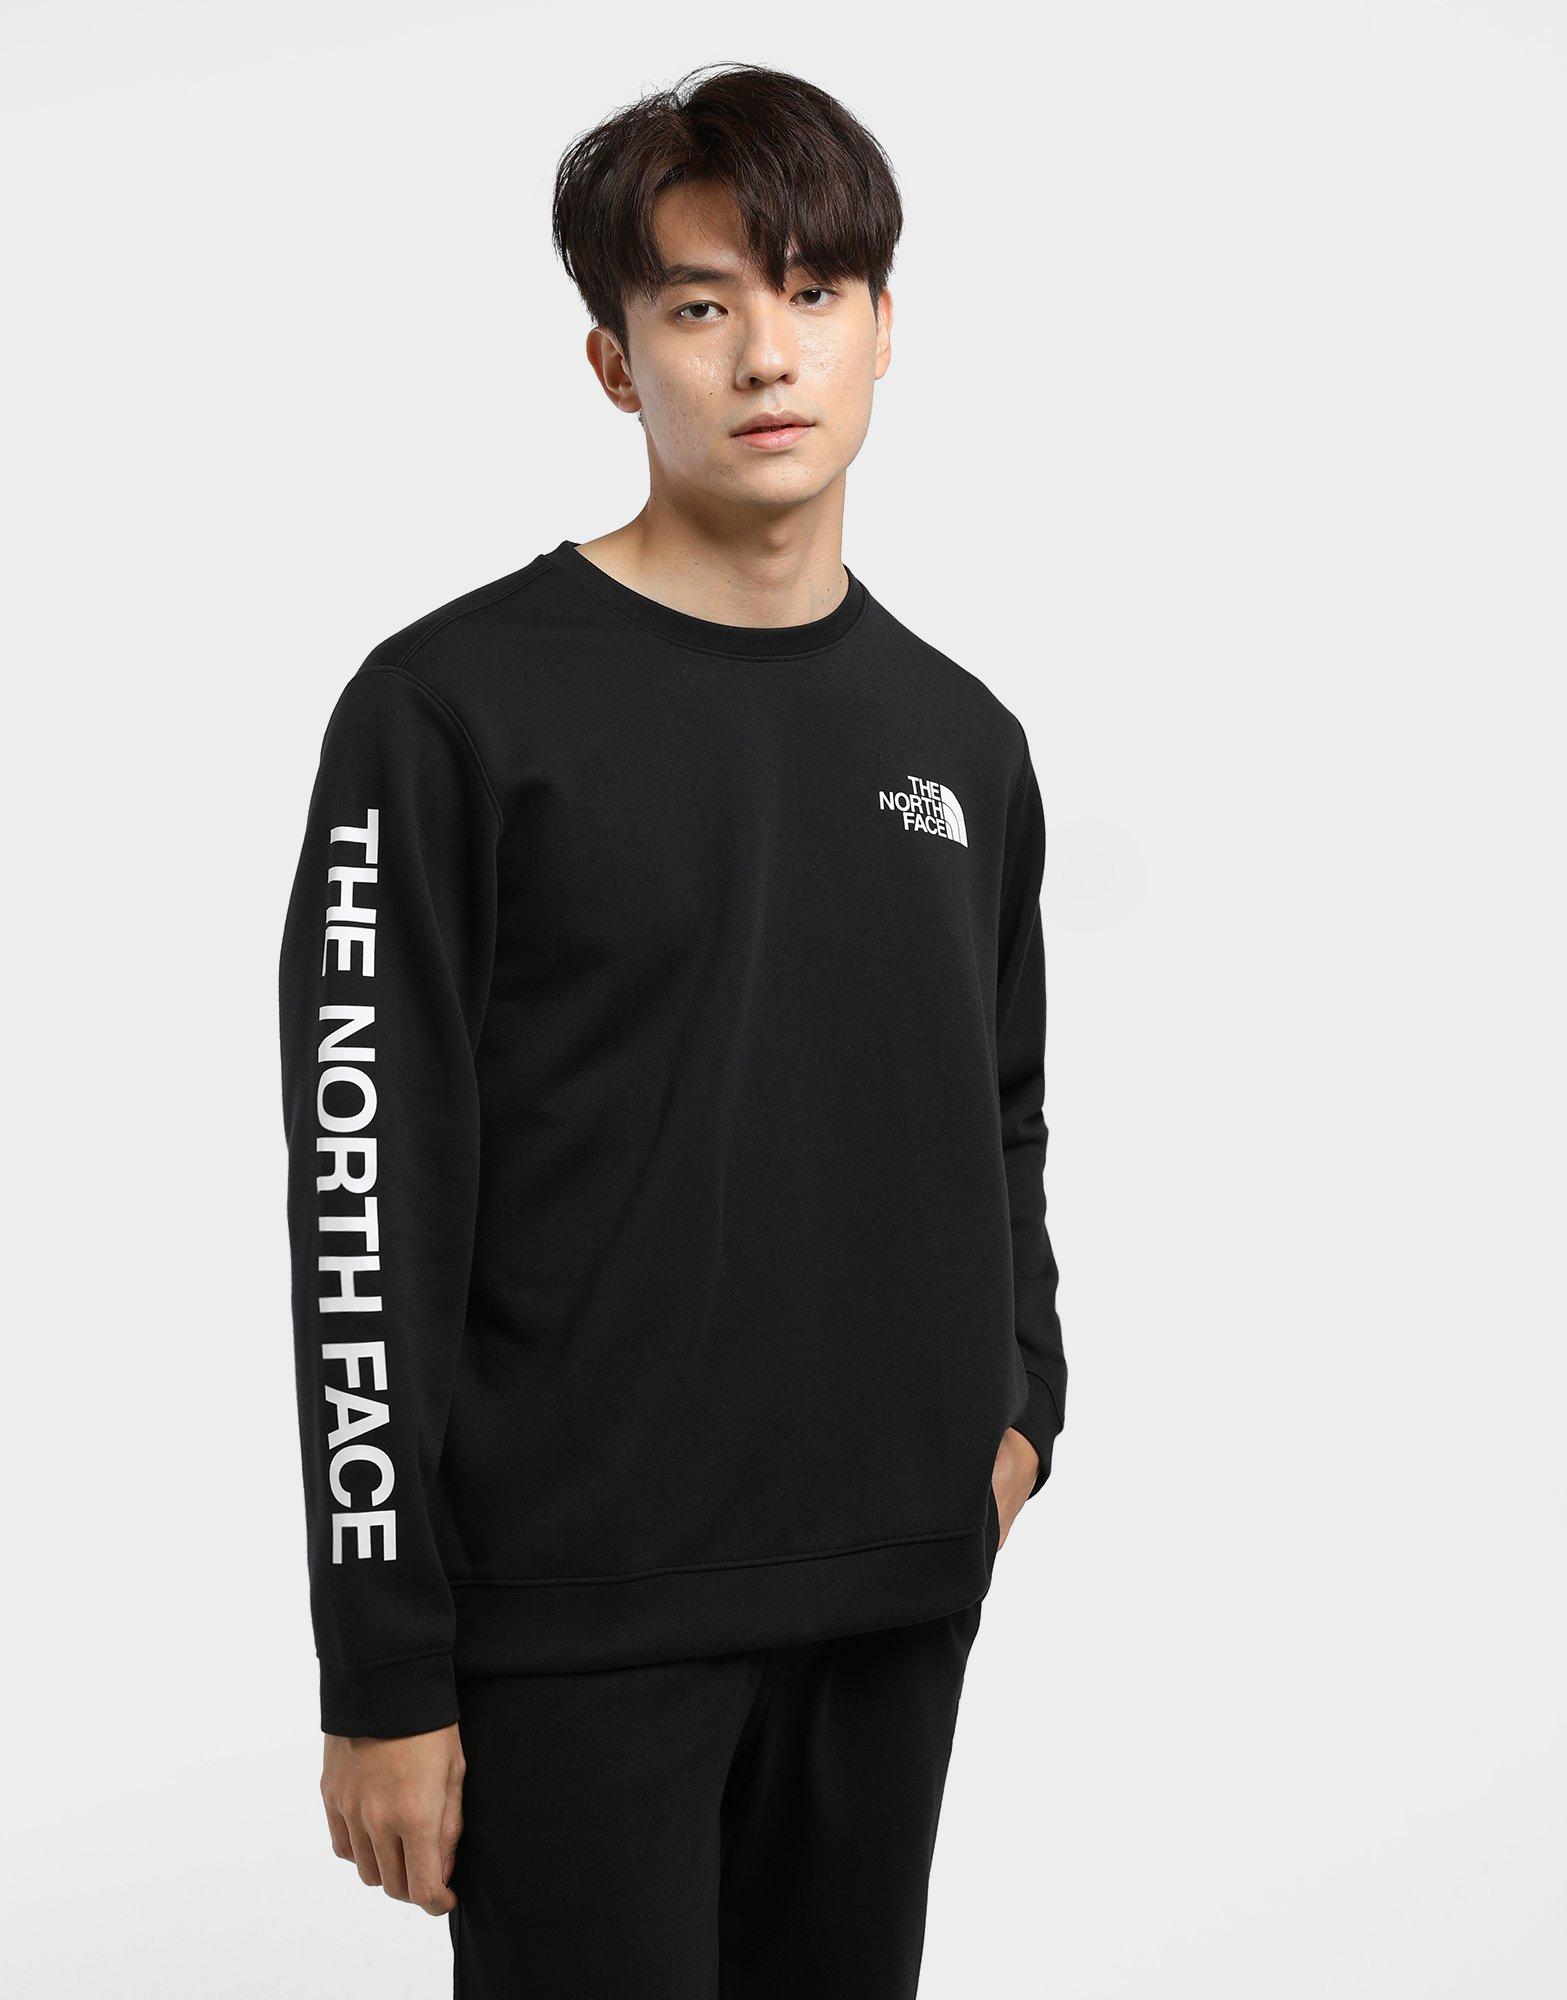 black and white north face t shirt